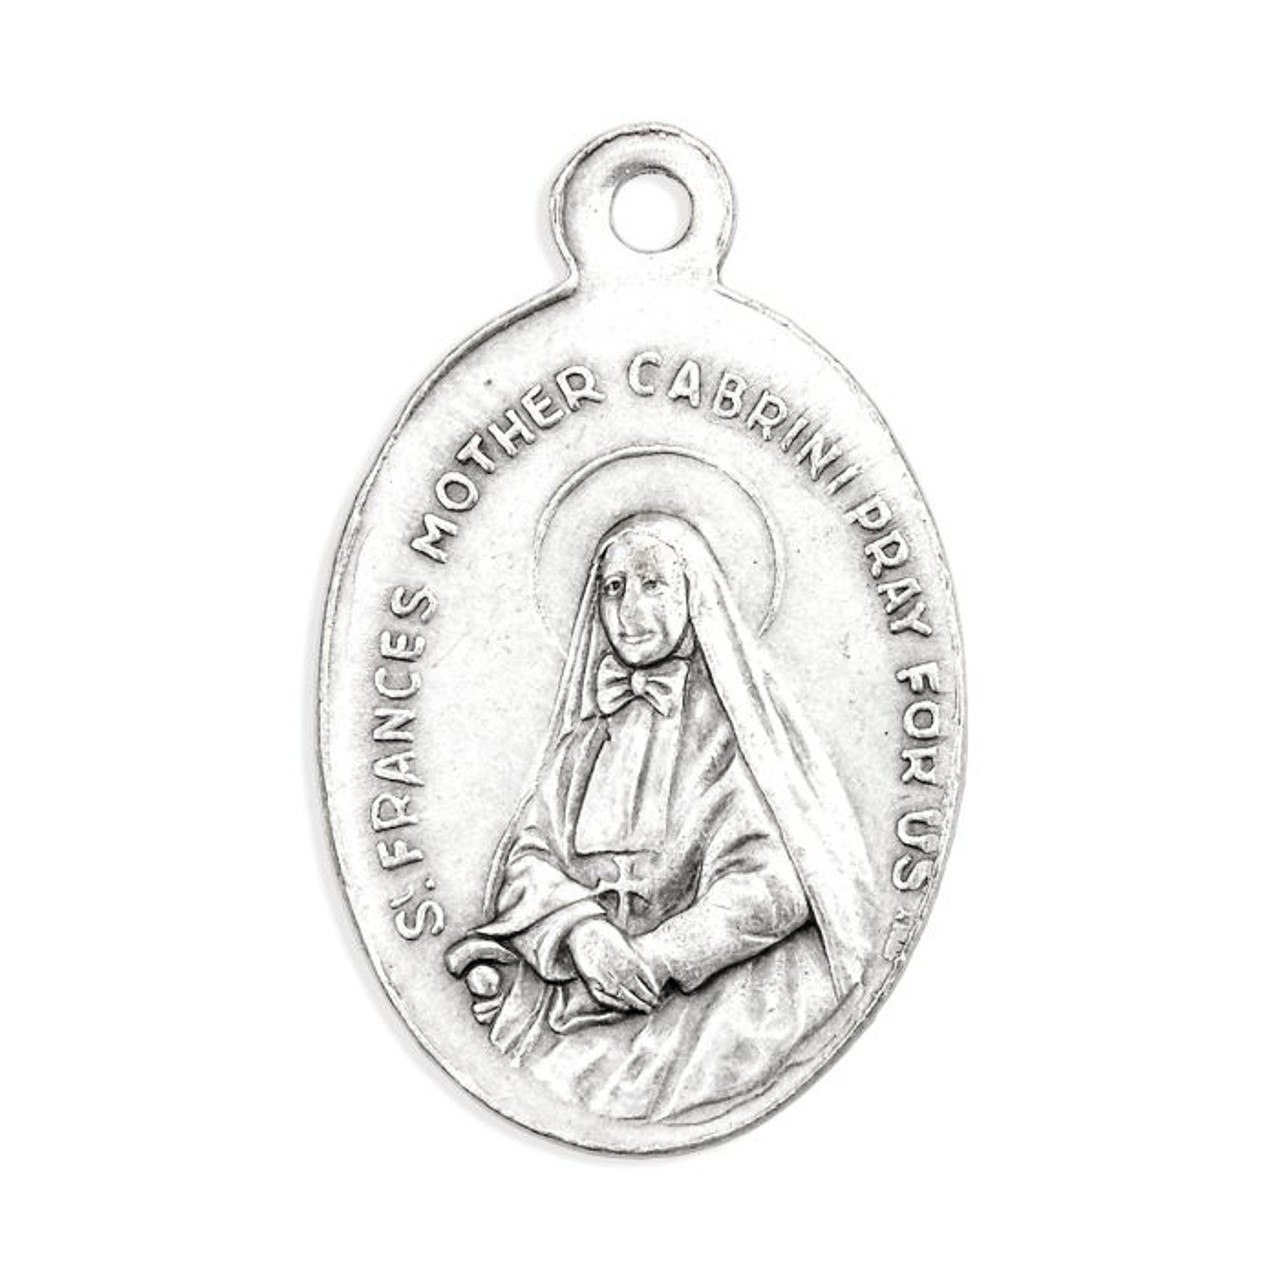 1" Oval Antiqued Silver Oxidized Mother Cabrini Medal & St. Francis Xavier - Style B